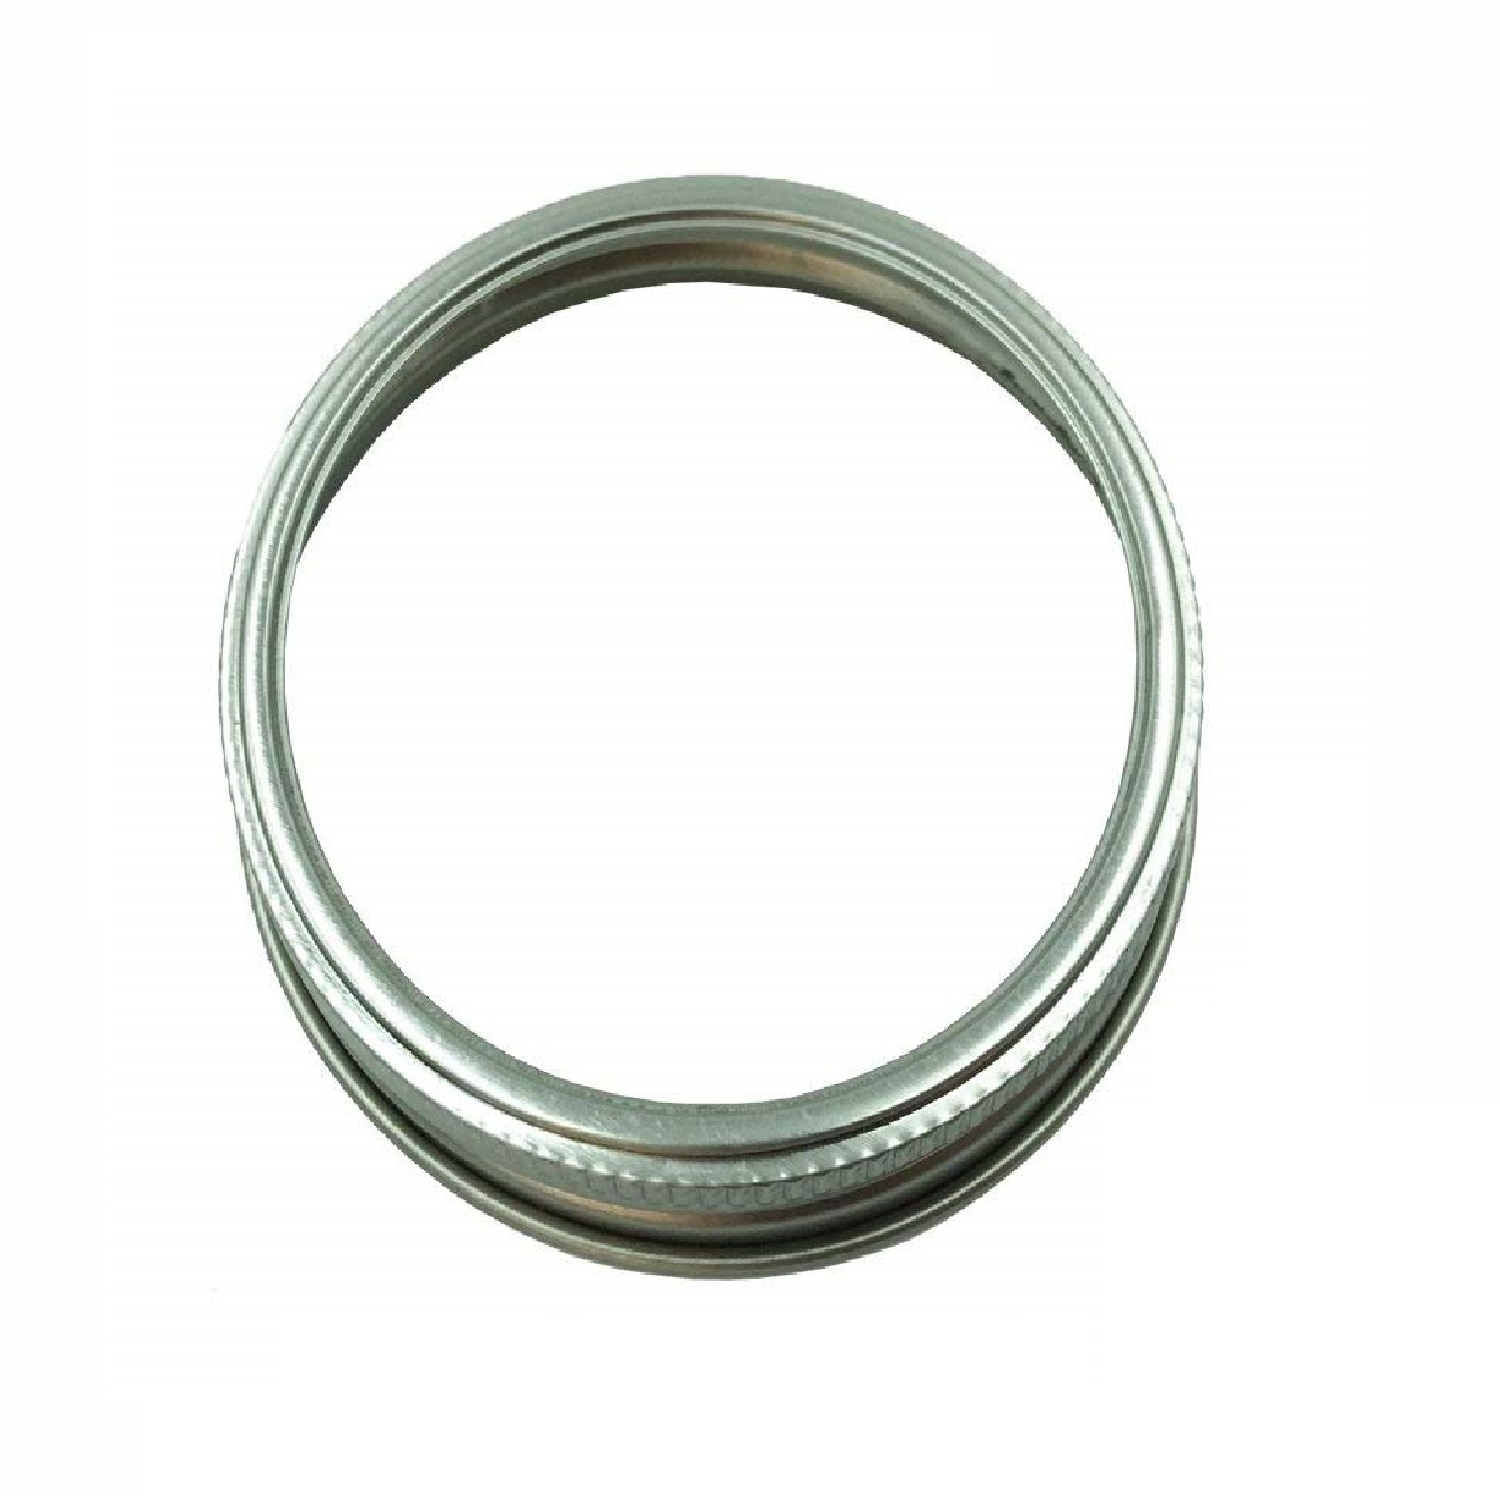 Silver rust resistant screw stainless steel rings / bands for Mason jars